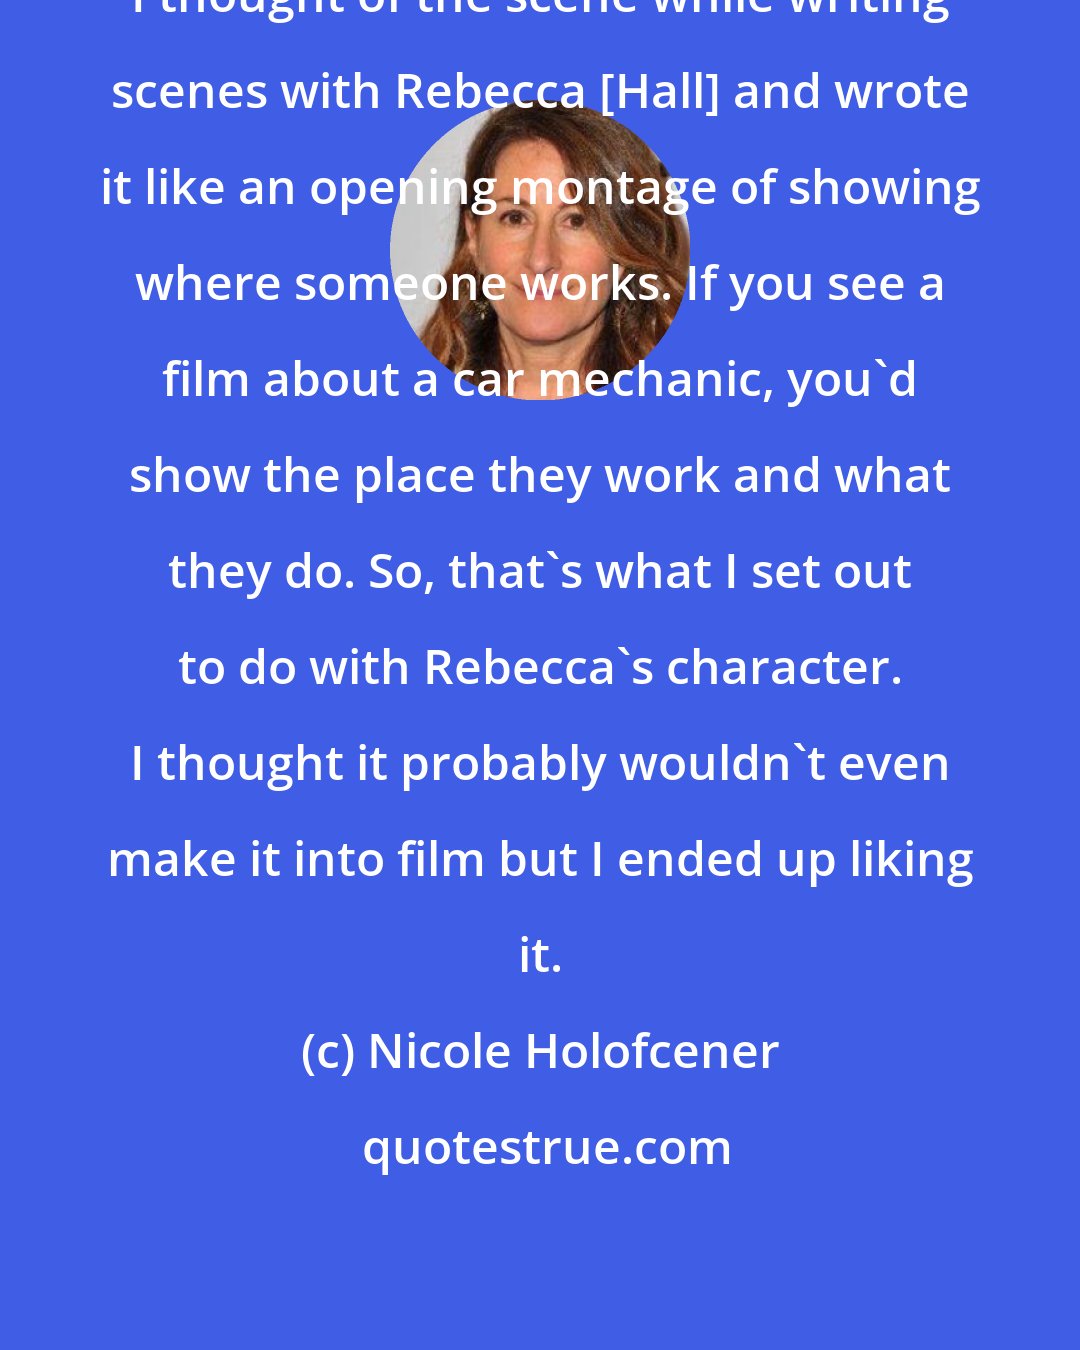 Nicole Holofcener: I thought of the scene while writing scenes with Rebecca [Hall] and wrote it like an opening montage of showing where someone works. If you see a film about a car mechanic, you'd show the place they work and what they do. So, that's what I set out to do with Rebecca's character. I thought it probably wouldn't even make it into film but I ended up liking it.